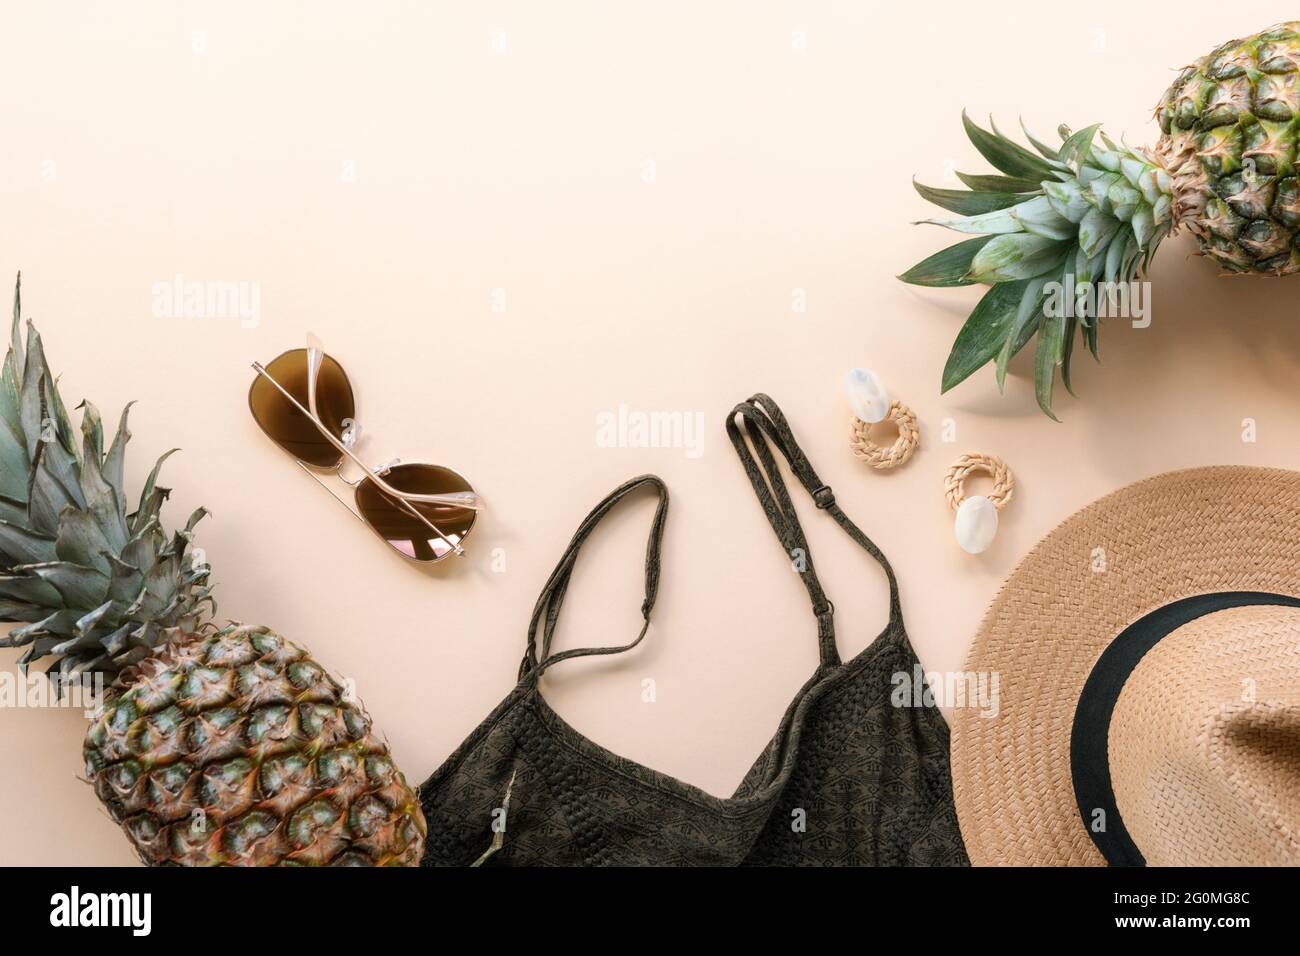 Women's summer clothes, accessories and pineapples. Beauty, fashion, summer vacation concept. Top view, flat lay, copy space. Stock Photo